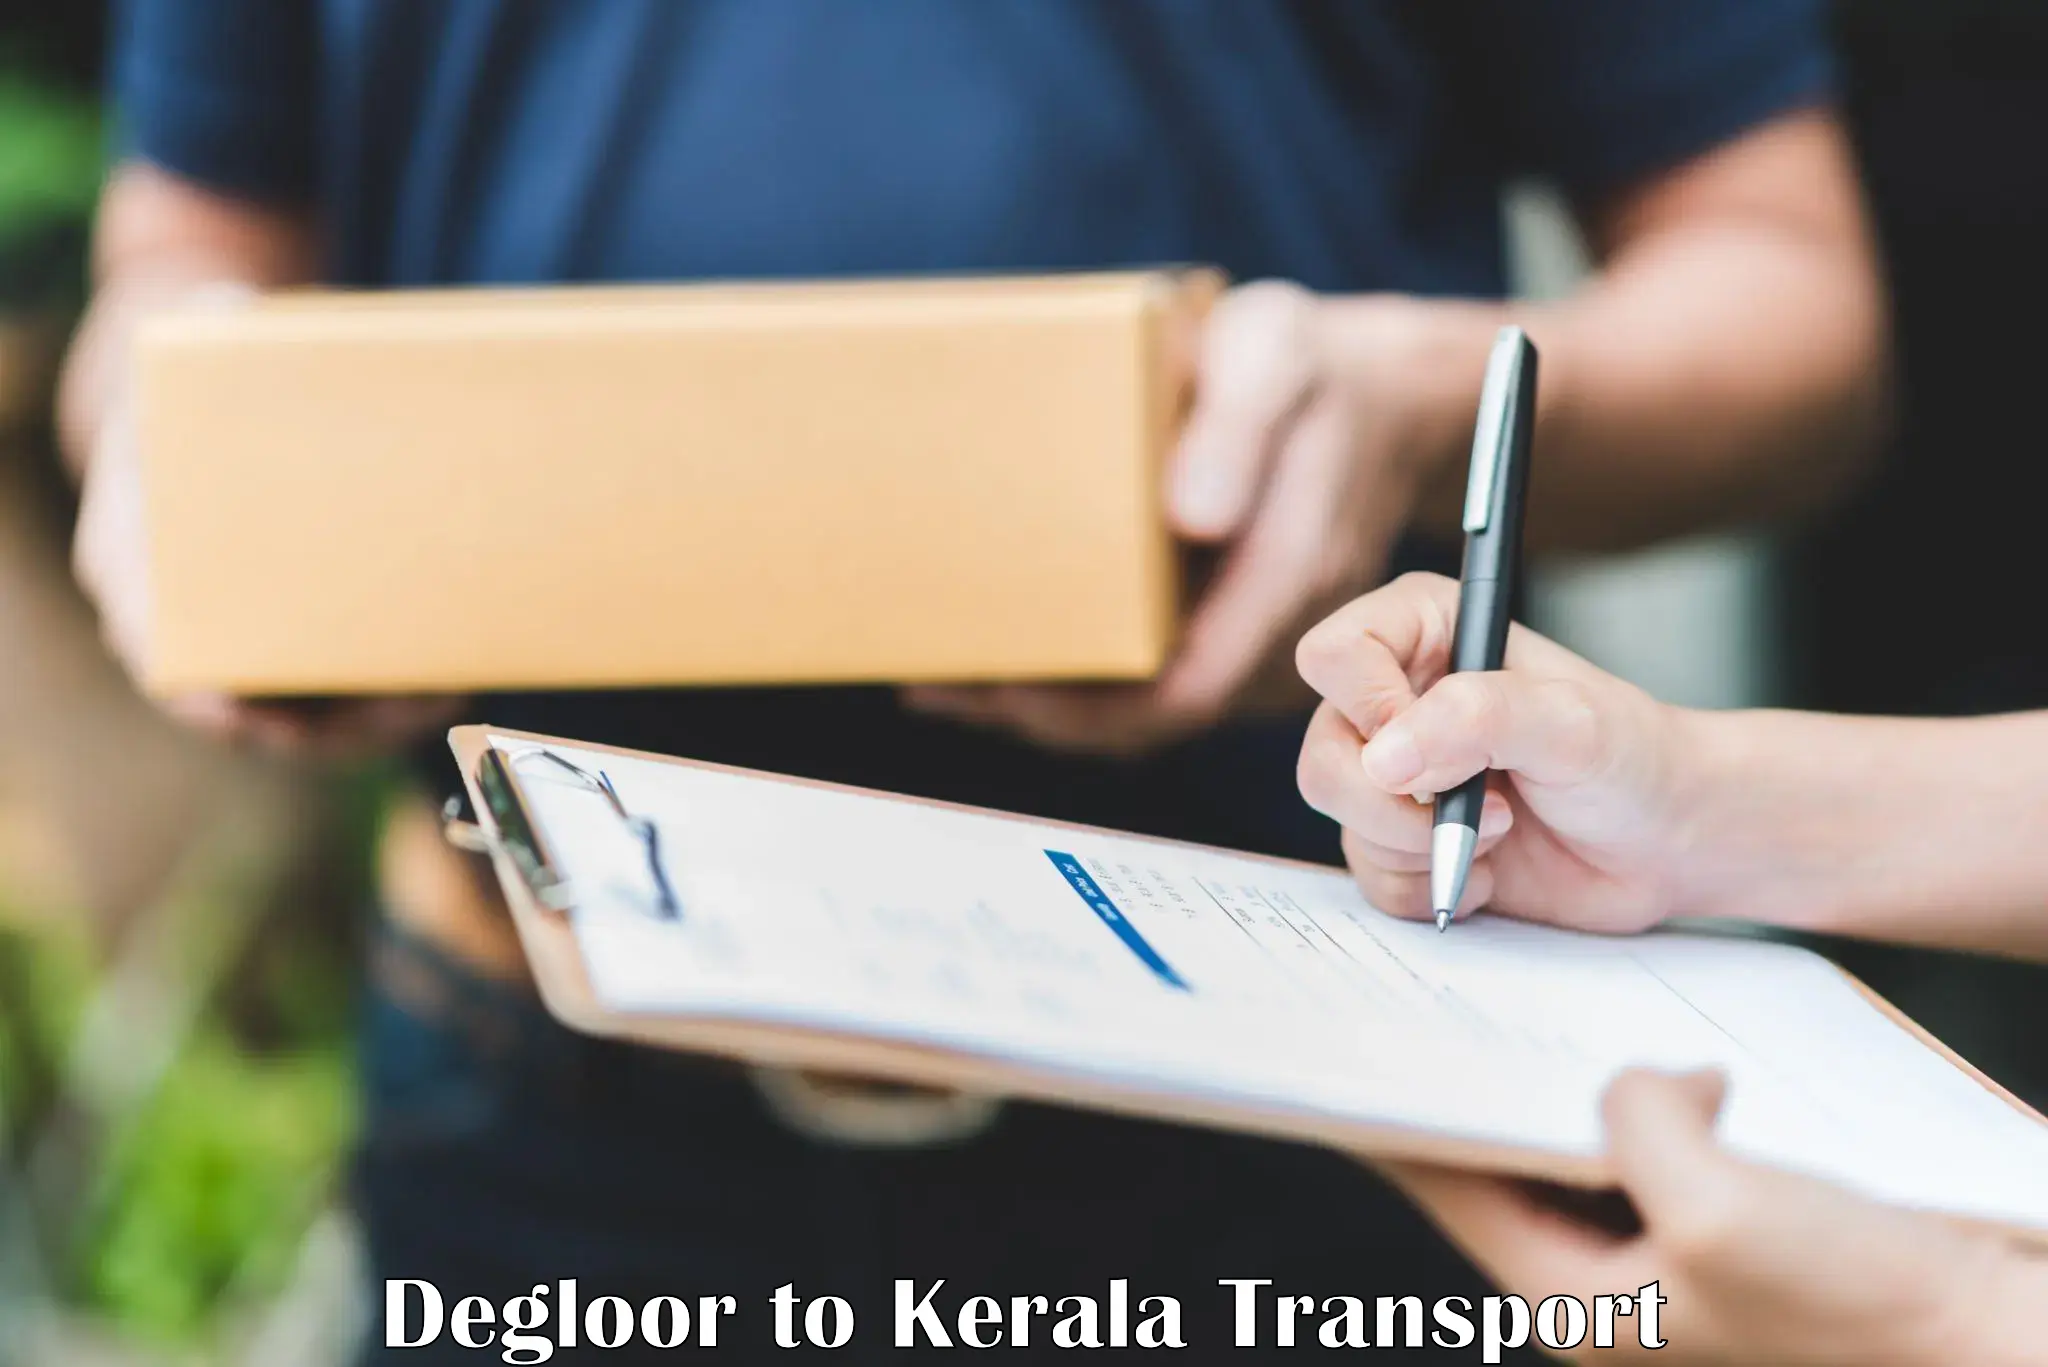 Transport bike from one state to another in Degloor to Edavanna